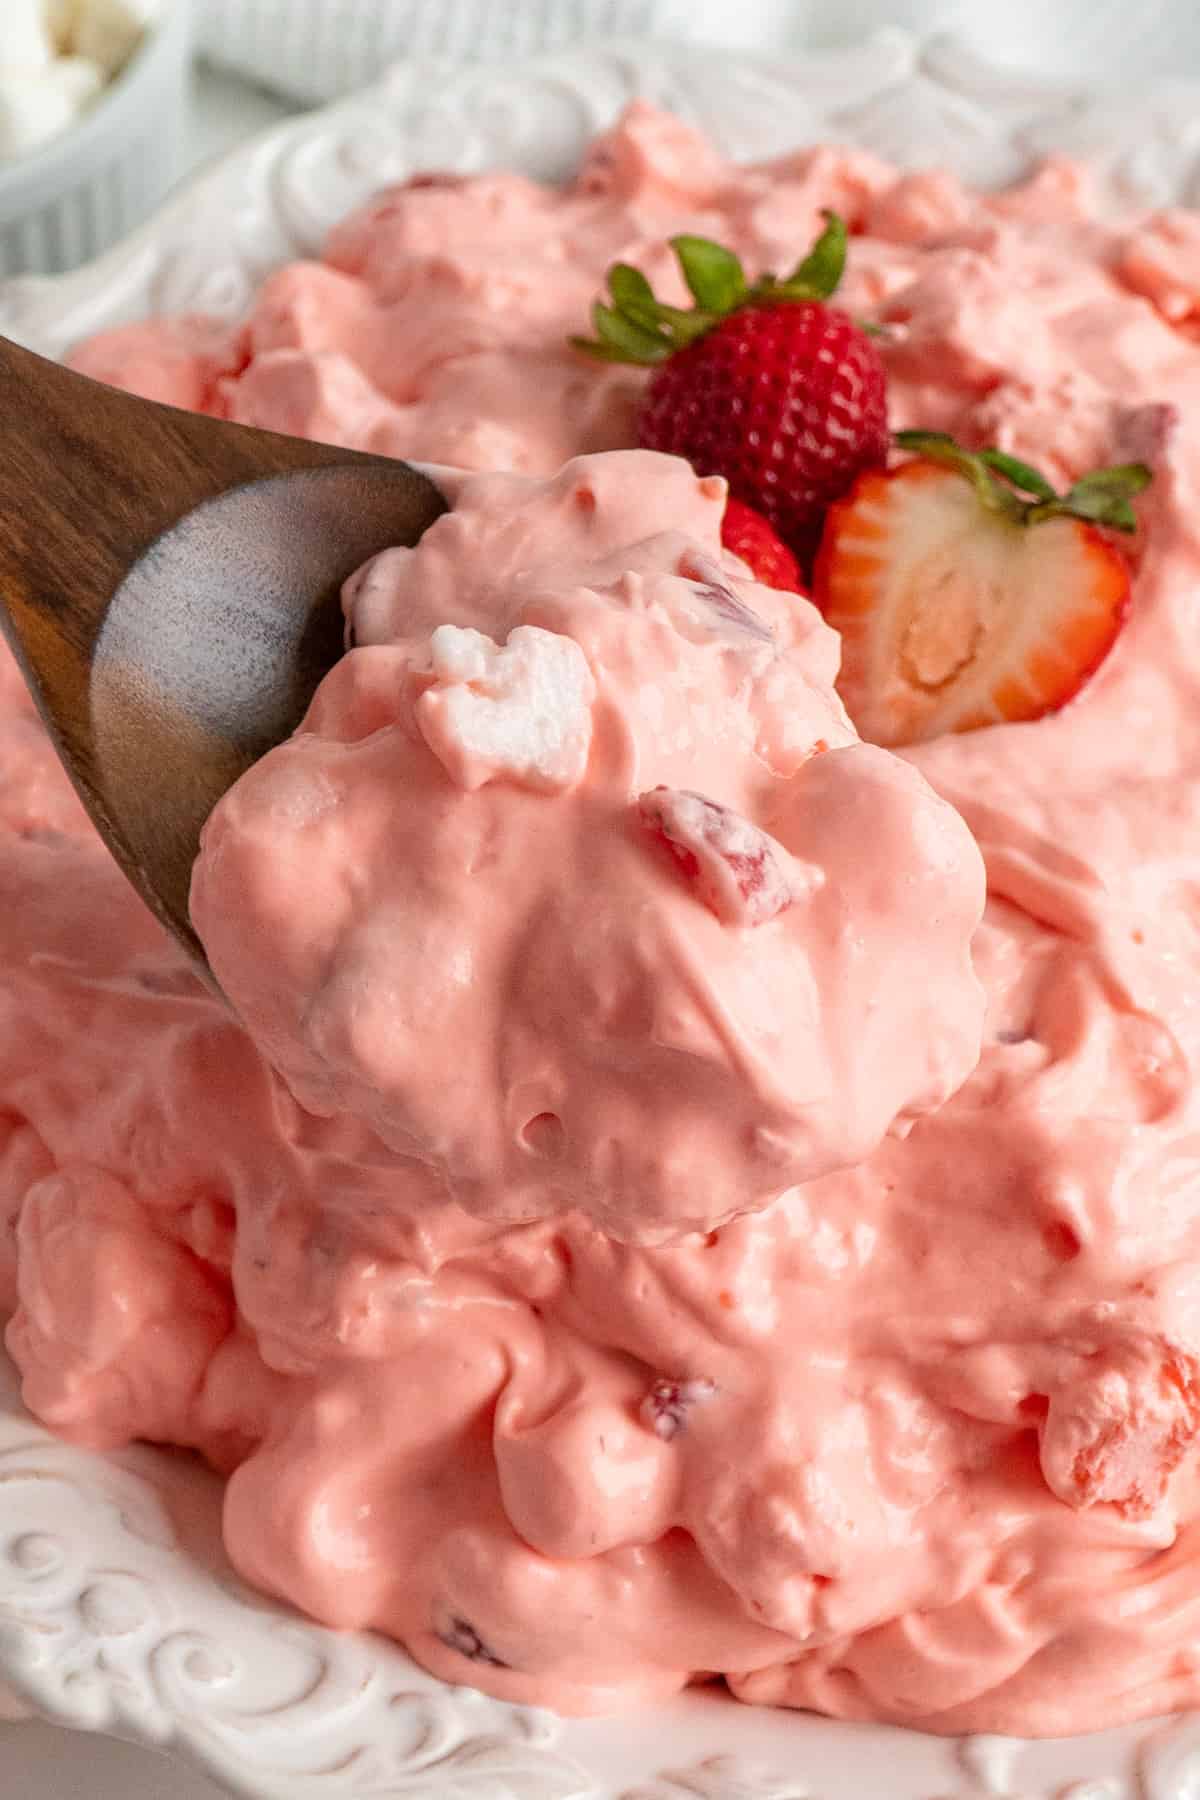 A wooden spoon holding a scoop of strawberry fluff salad.